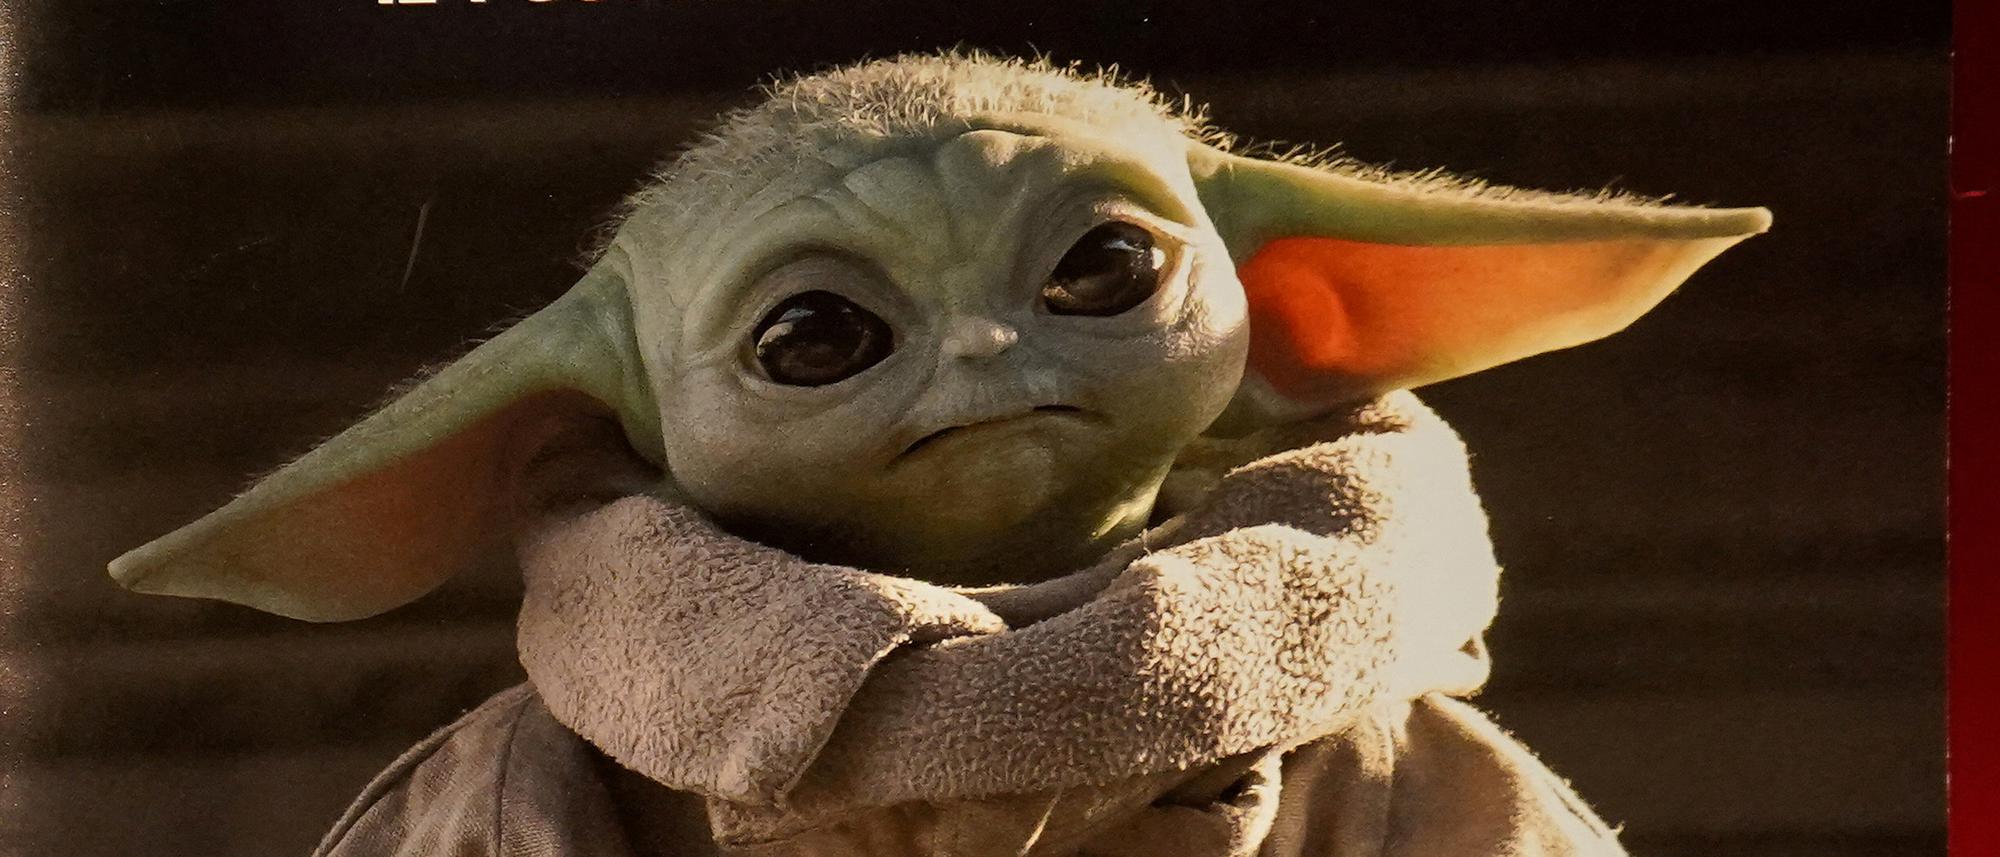 https://www.tagesspiegel.de/images/file-photo-baby-yoda-items-are-pictured-during-a-star-wars-advance-product-showcase-in-the-manhattan-borough-of-new-york-city/alternates/BASE_21_9_W2000/file-photo-baby-yoda-items-are-pictured-during-a-star-wars-advance-product-showcase-in-the-manhattan-borough-of-new-york-city.jpeg